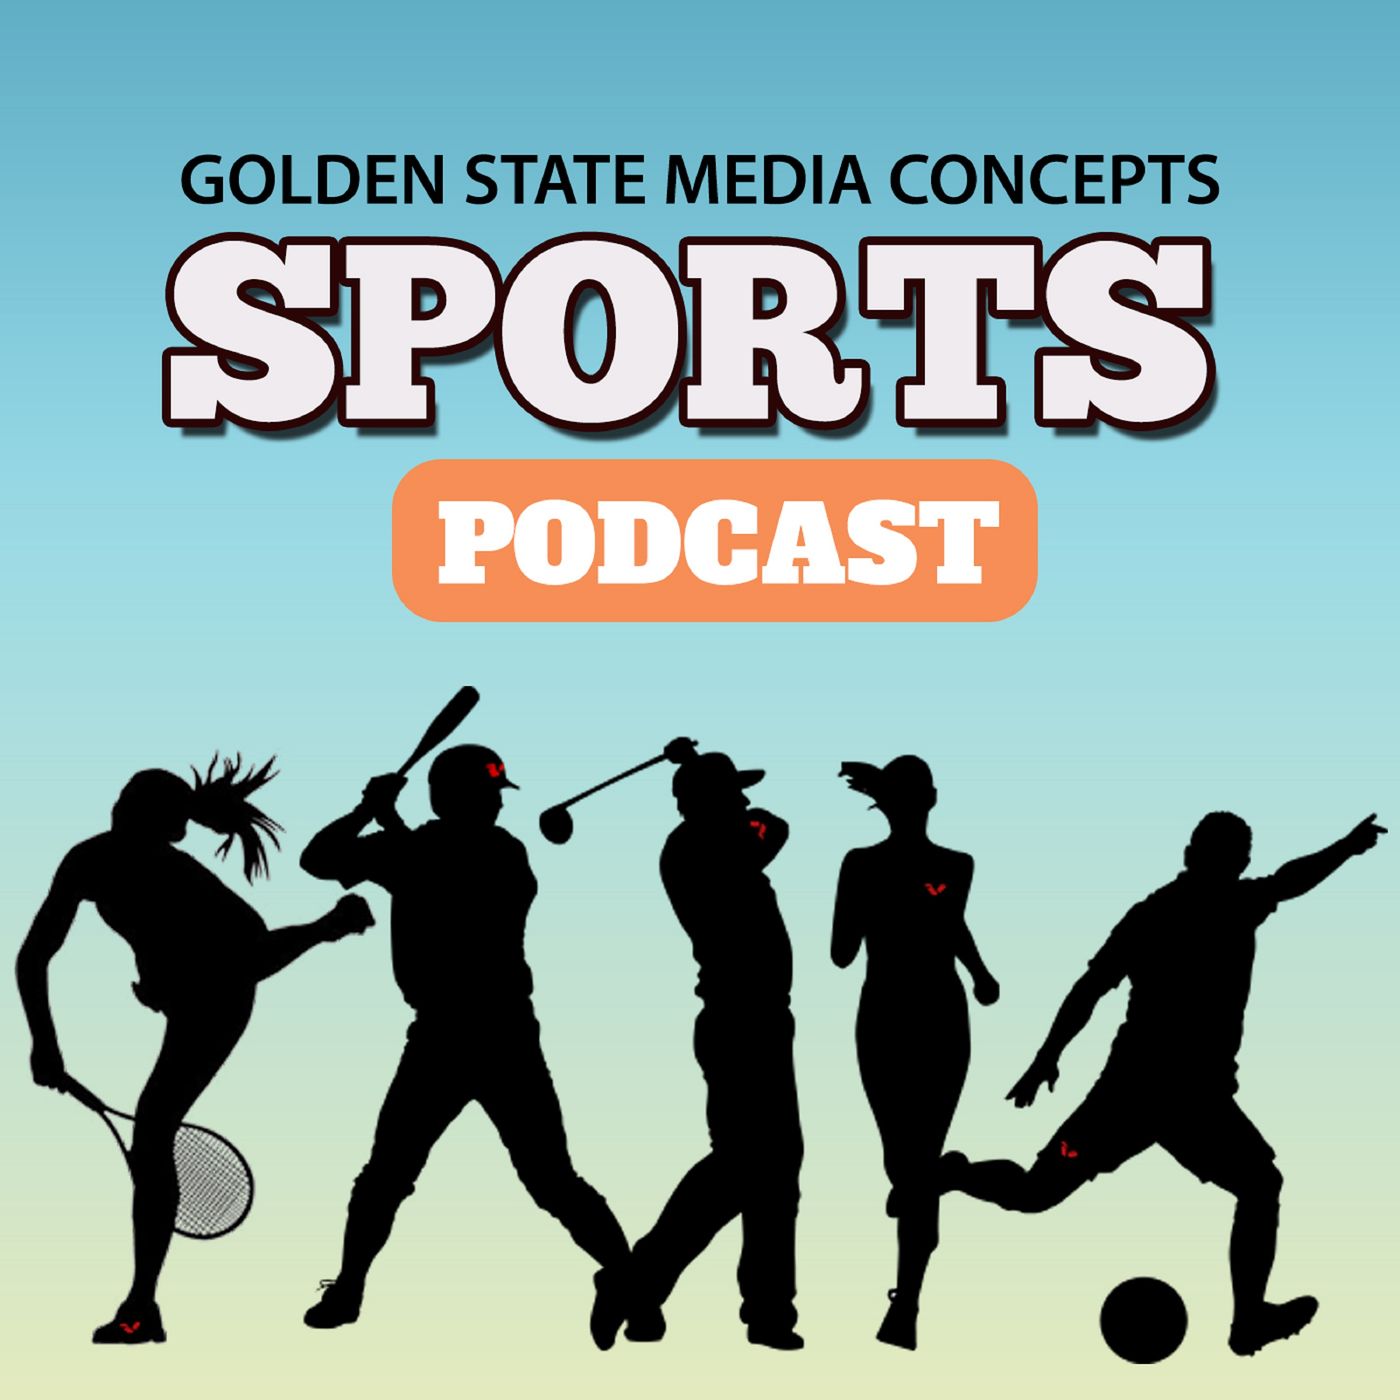 Knicks Take Game 2 Despite Injuries, NHL Playoff Overview & NBA Awards | GSMC Sports Podcast